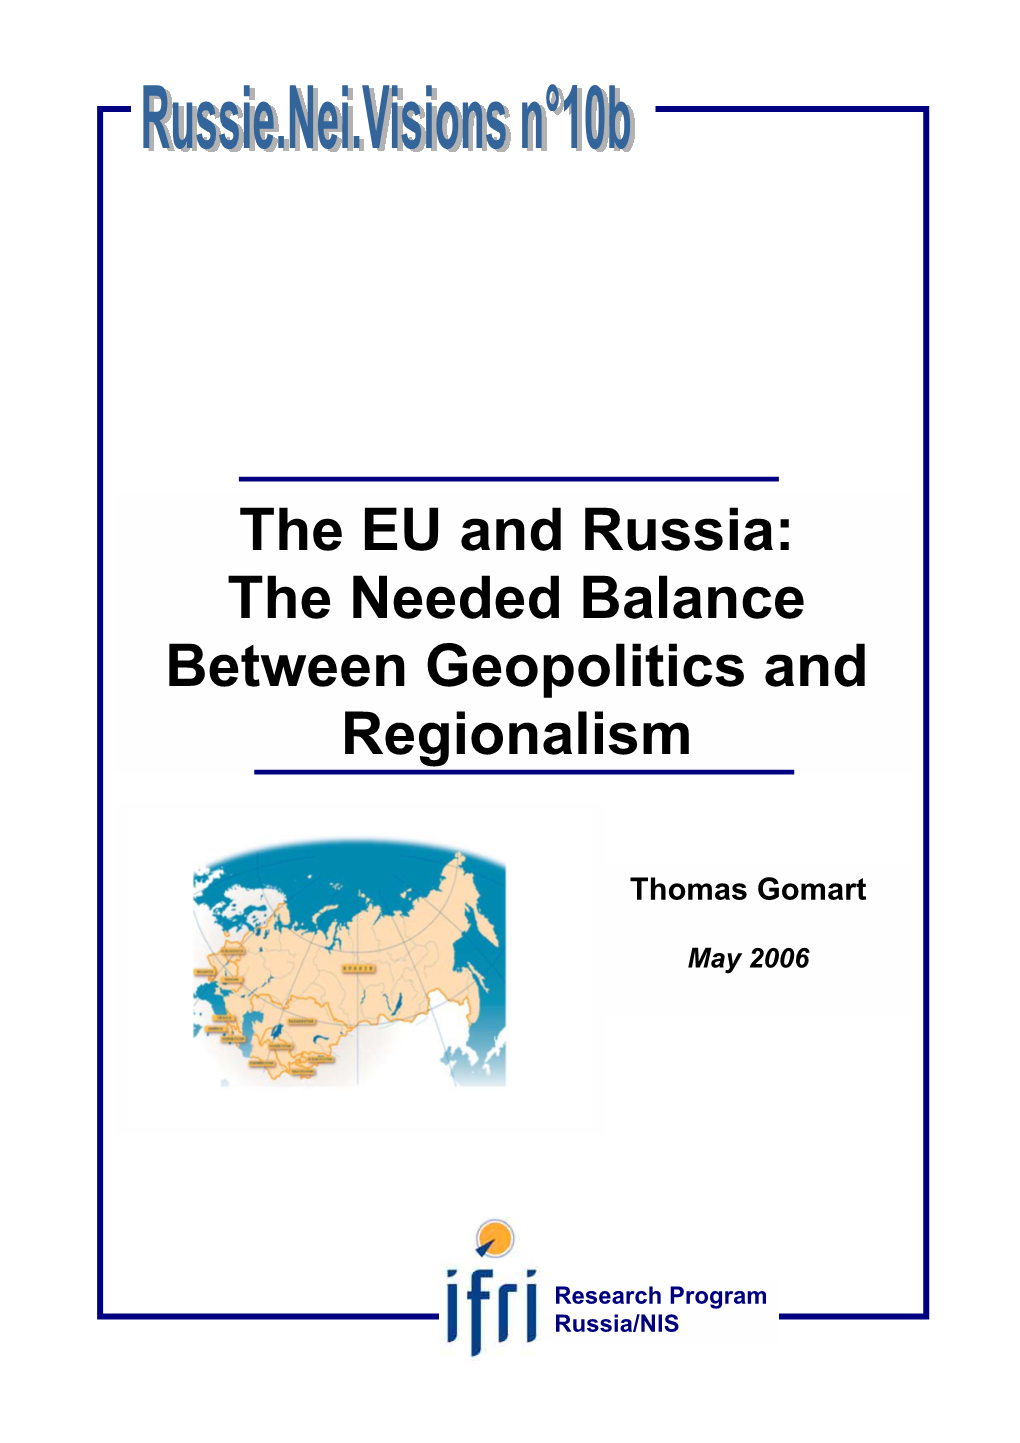 The EU and Russia: the Needed Balance Between Geopolitics and Regionalism